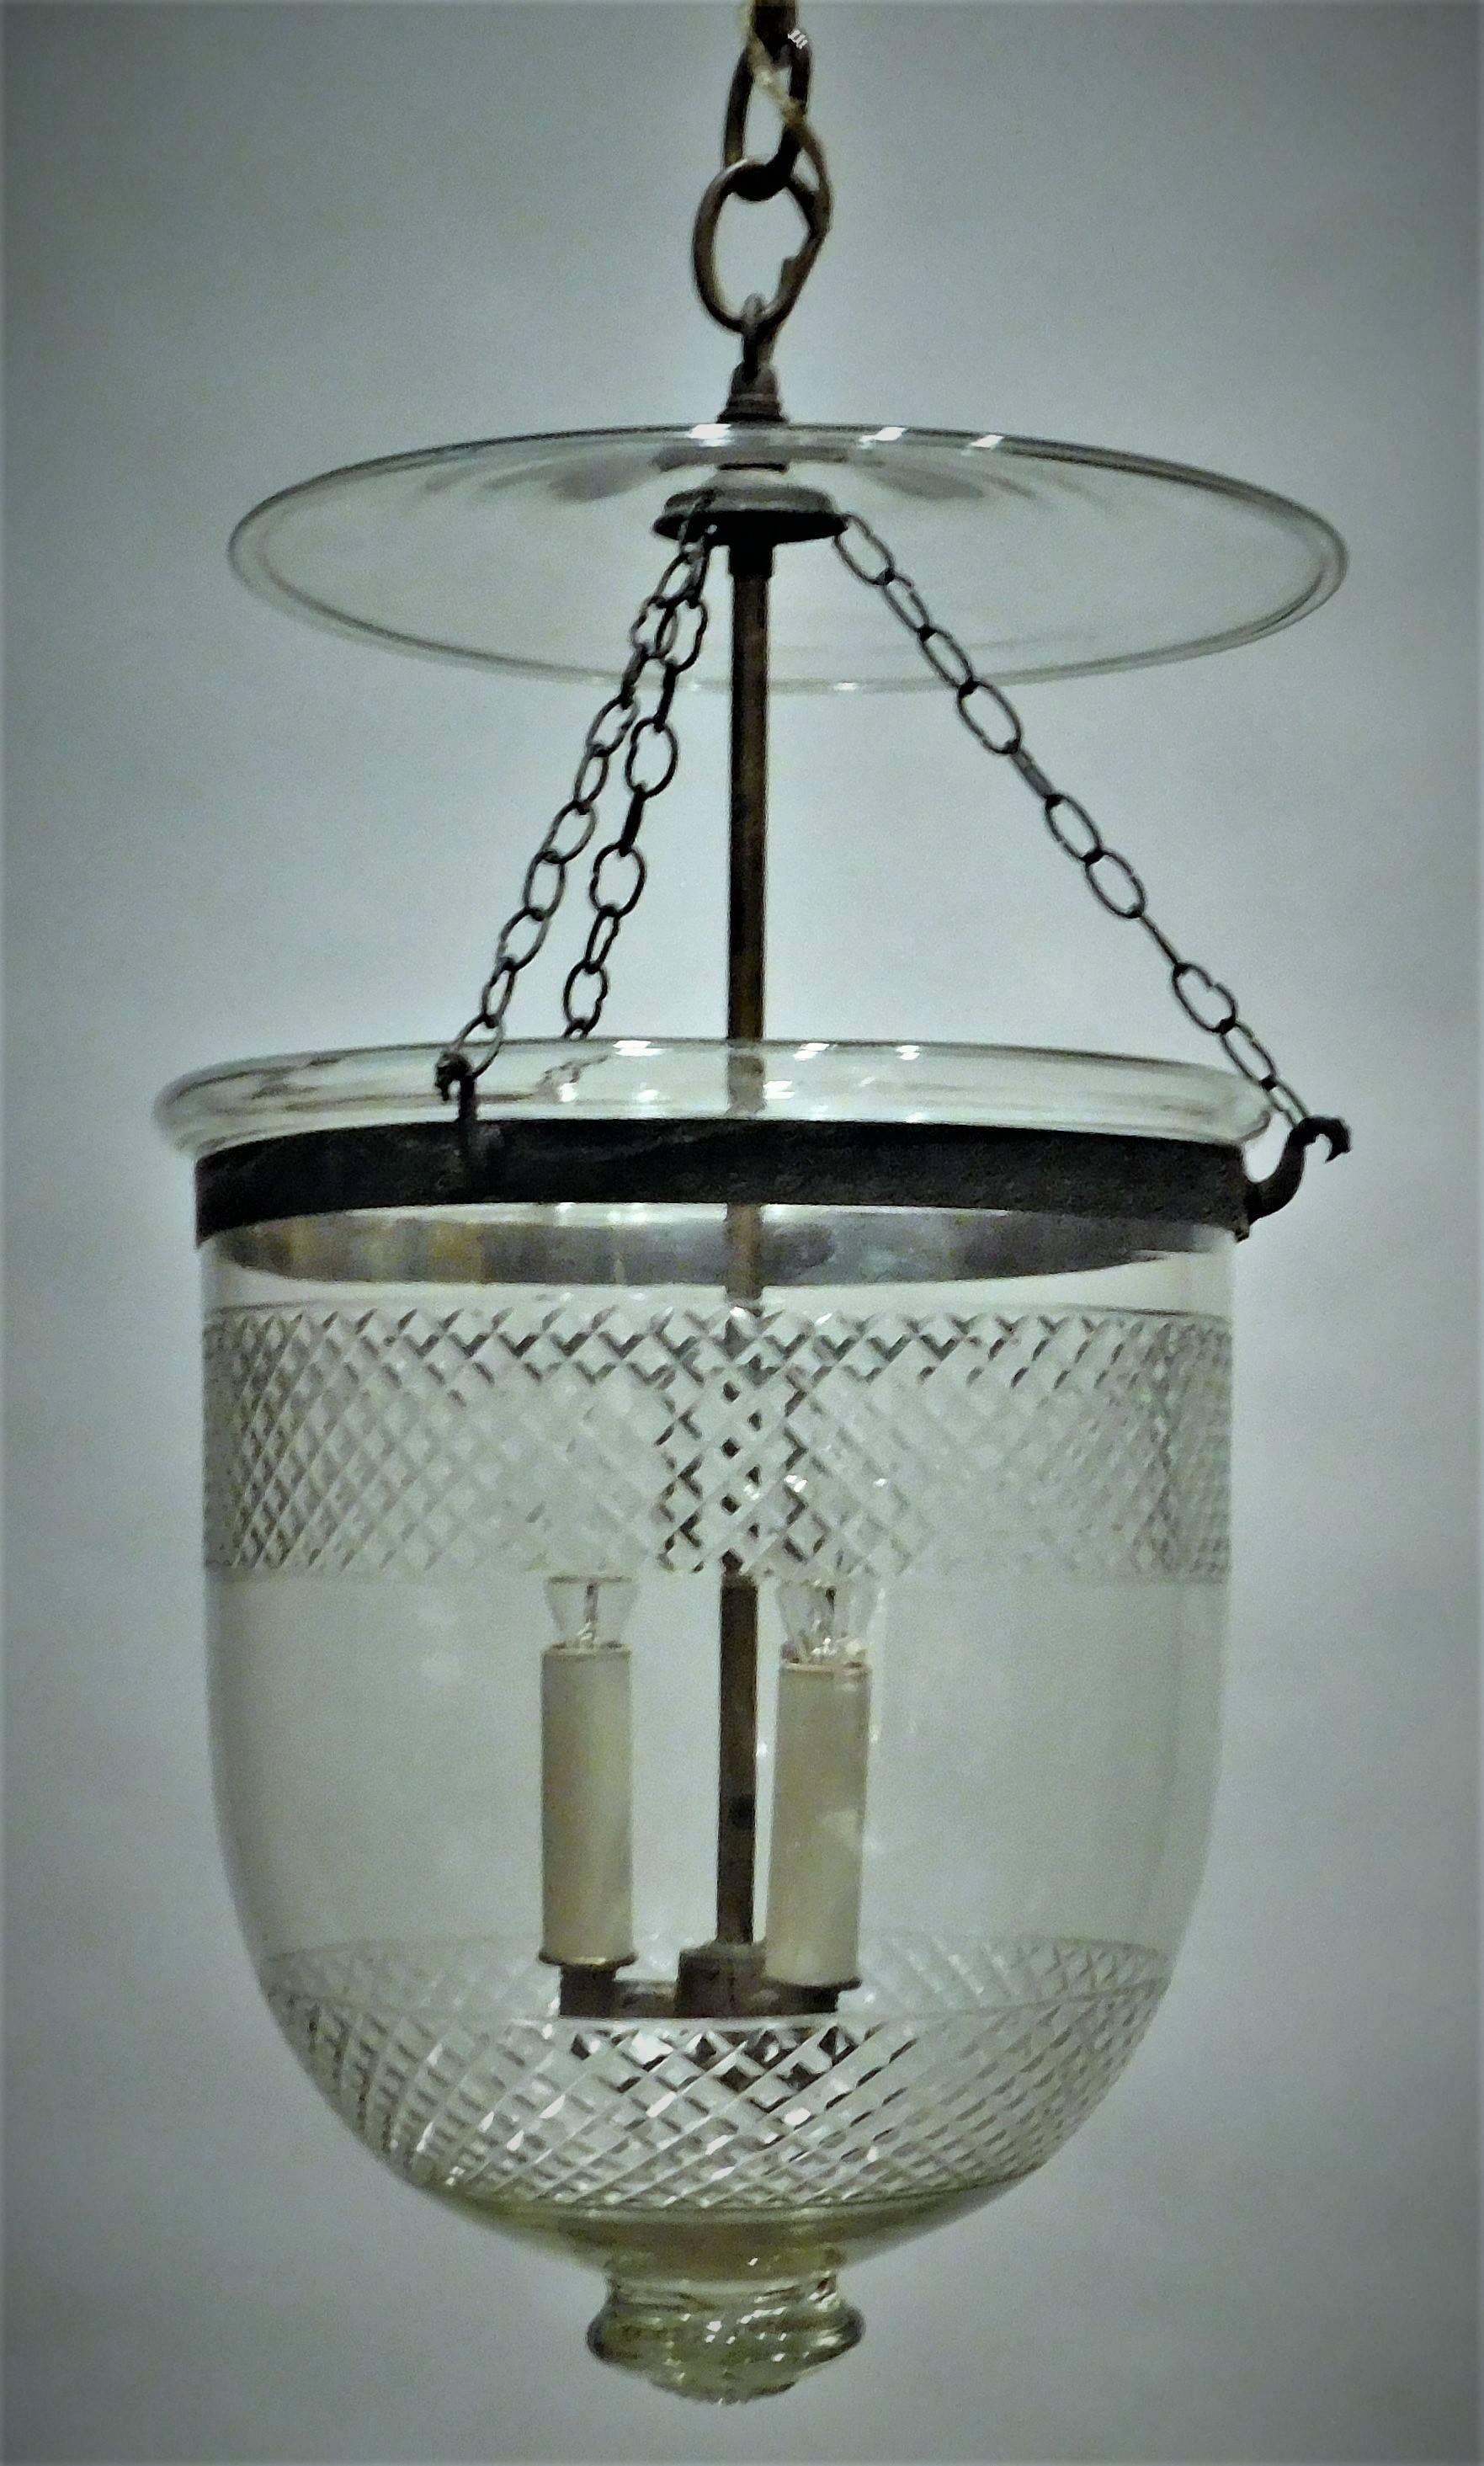 This handsome and very rare hand-blown lantern has 2 bands of hand-cut diamond pattern. Has its original brass ring. We have electrified the lantern with  a 3-light insert in solid brass, patinated to match the older brass fittings. Height can be